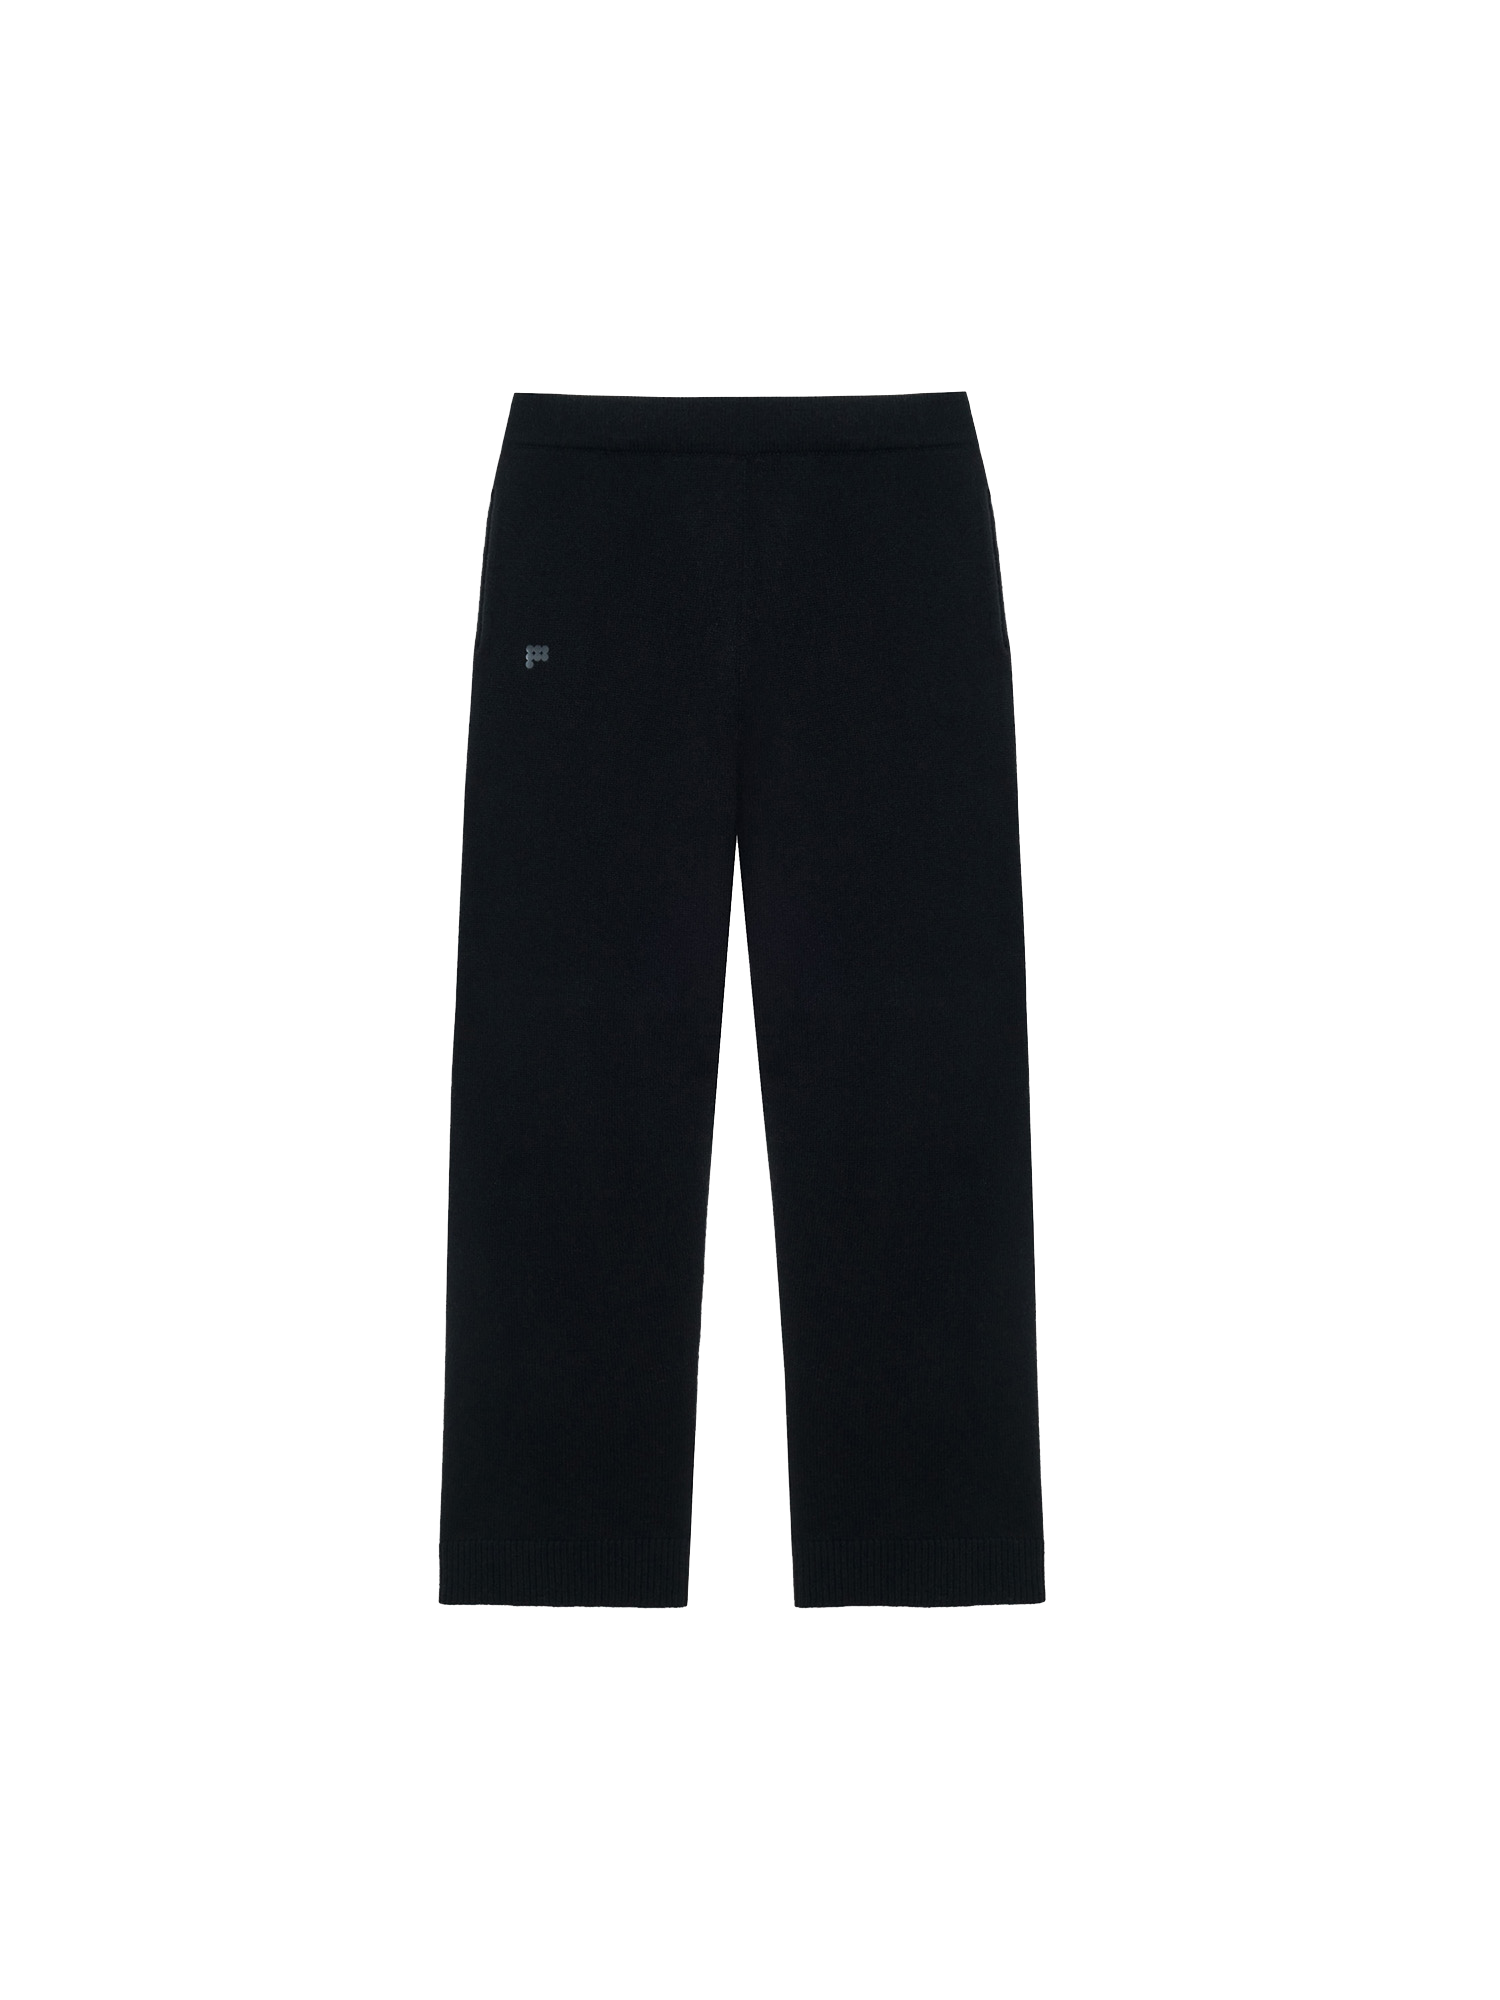 Recycled Cashmere Loose Track Pants - Black - Pangaia